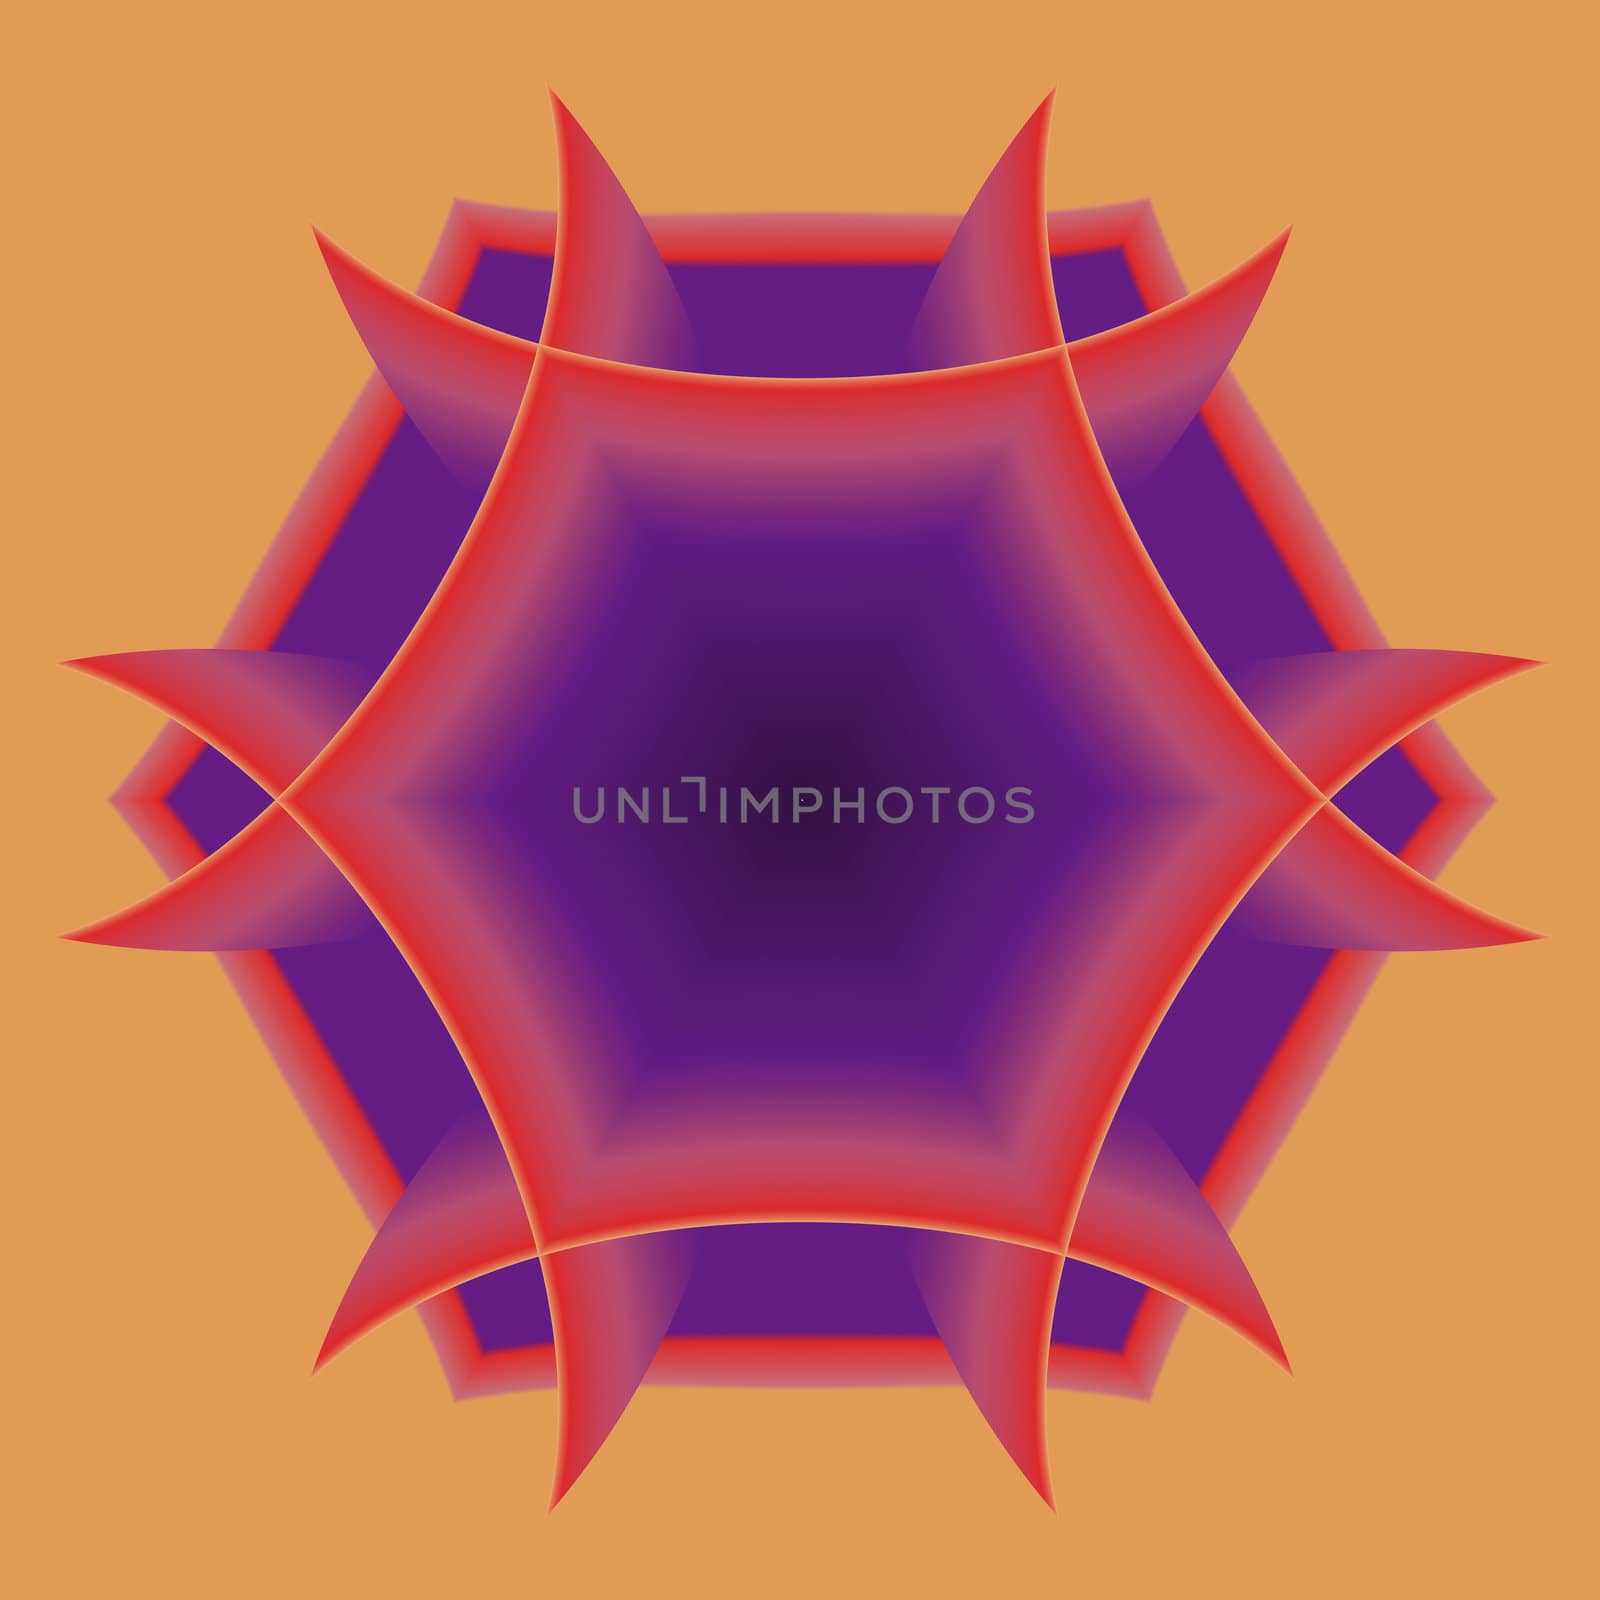 A six sided abstract fractal done in shades or purple, orange, and gold.